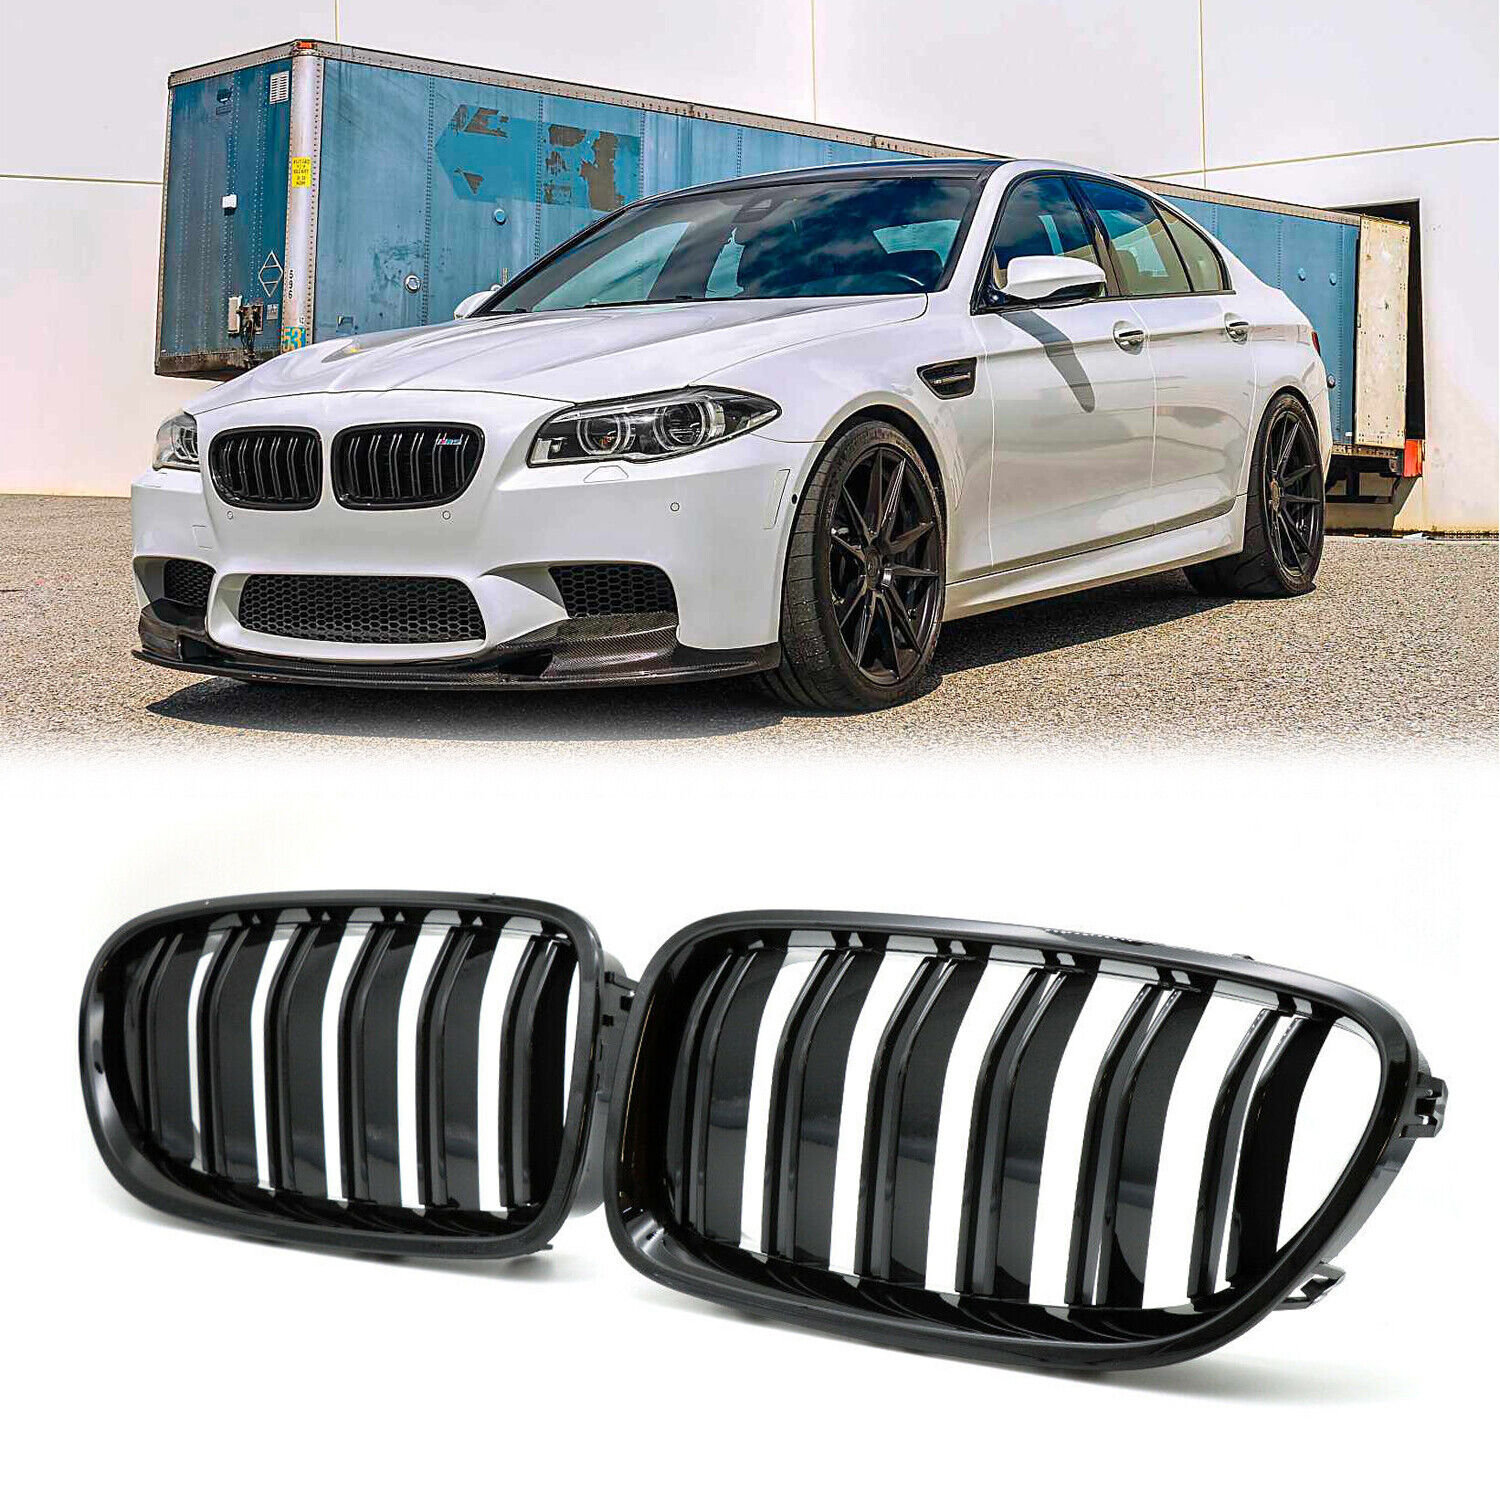 Front Kidney Grill for BMW 5 Series F10/F11 550i 535i 10-16 Glossy Black Grille